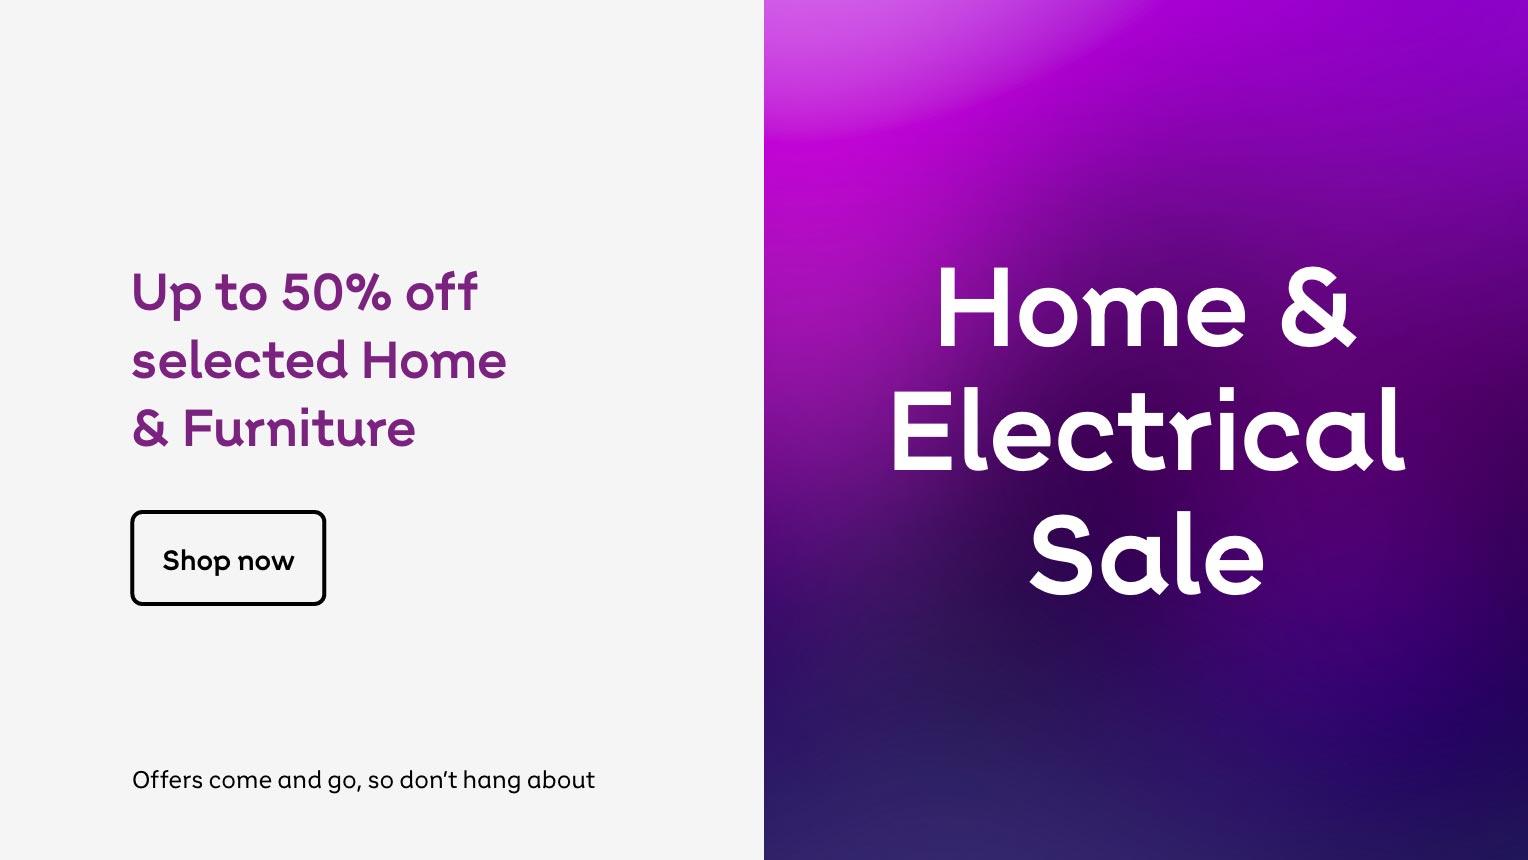 Home & Electrical sale. Up to 50% off selected home & furniture. Shop now. Offers come and go, so don't hang about.